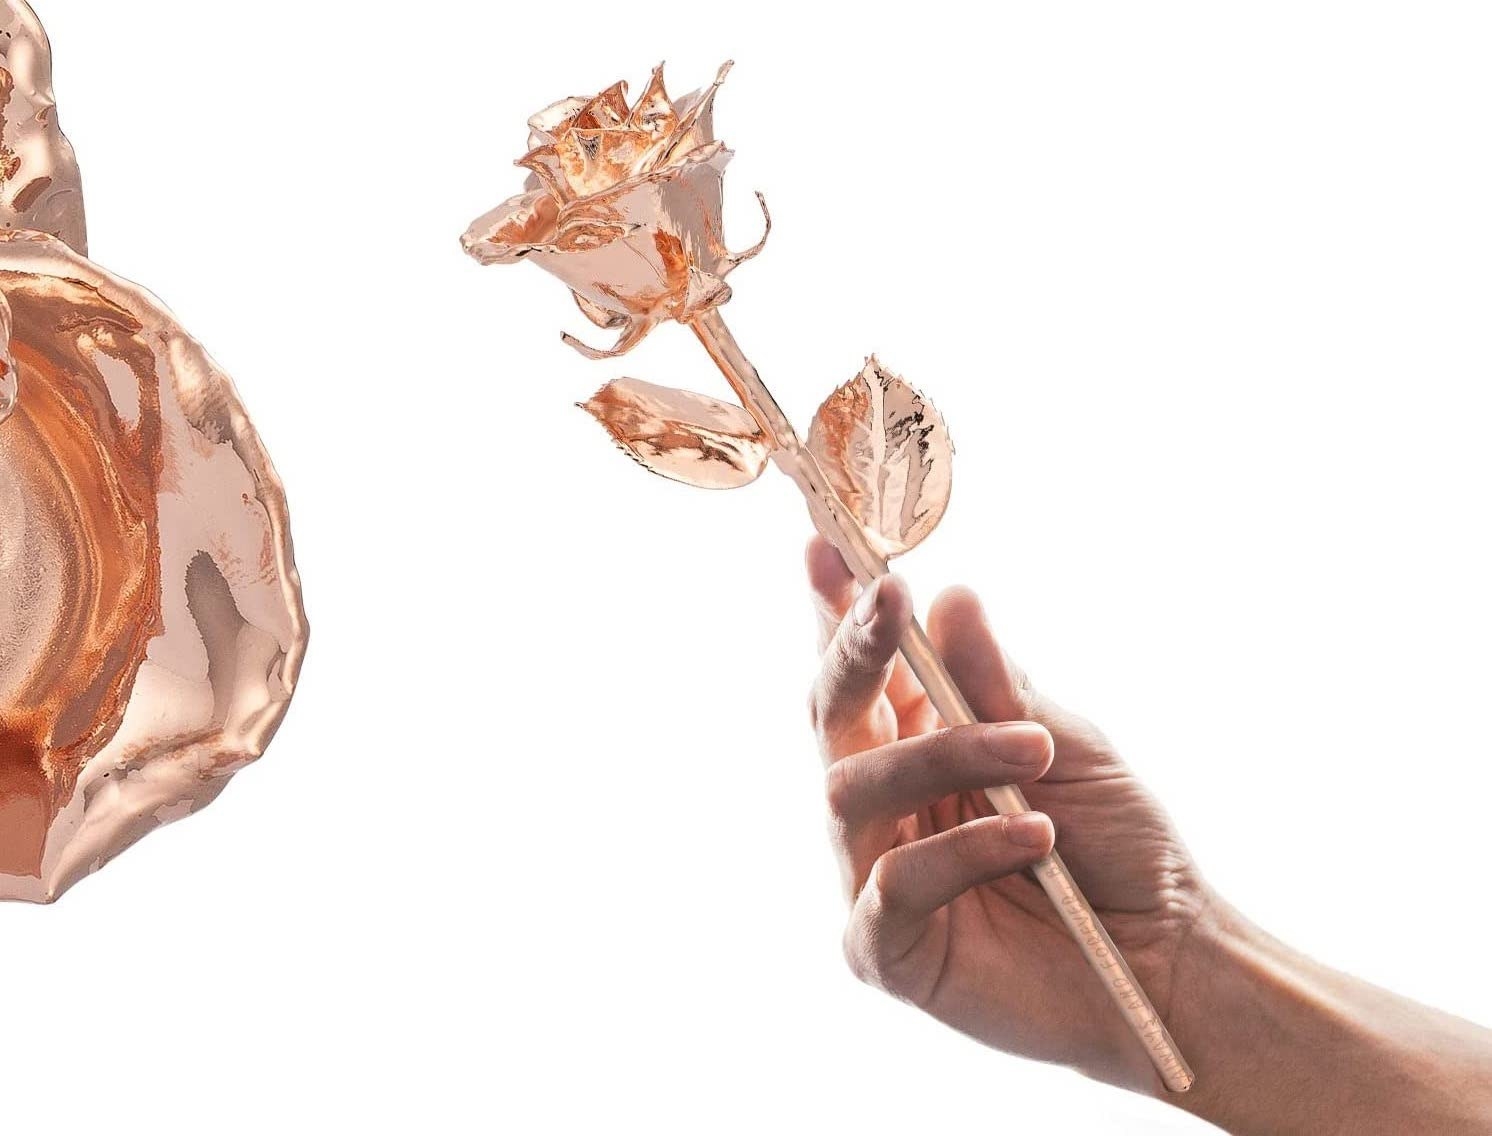 A person&#x27;s hand holding up one of the metallic roses